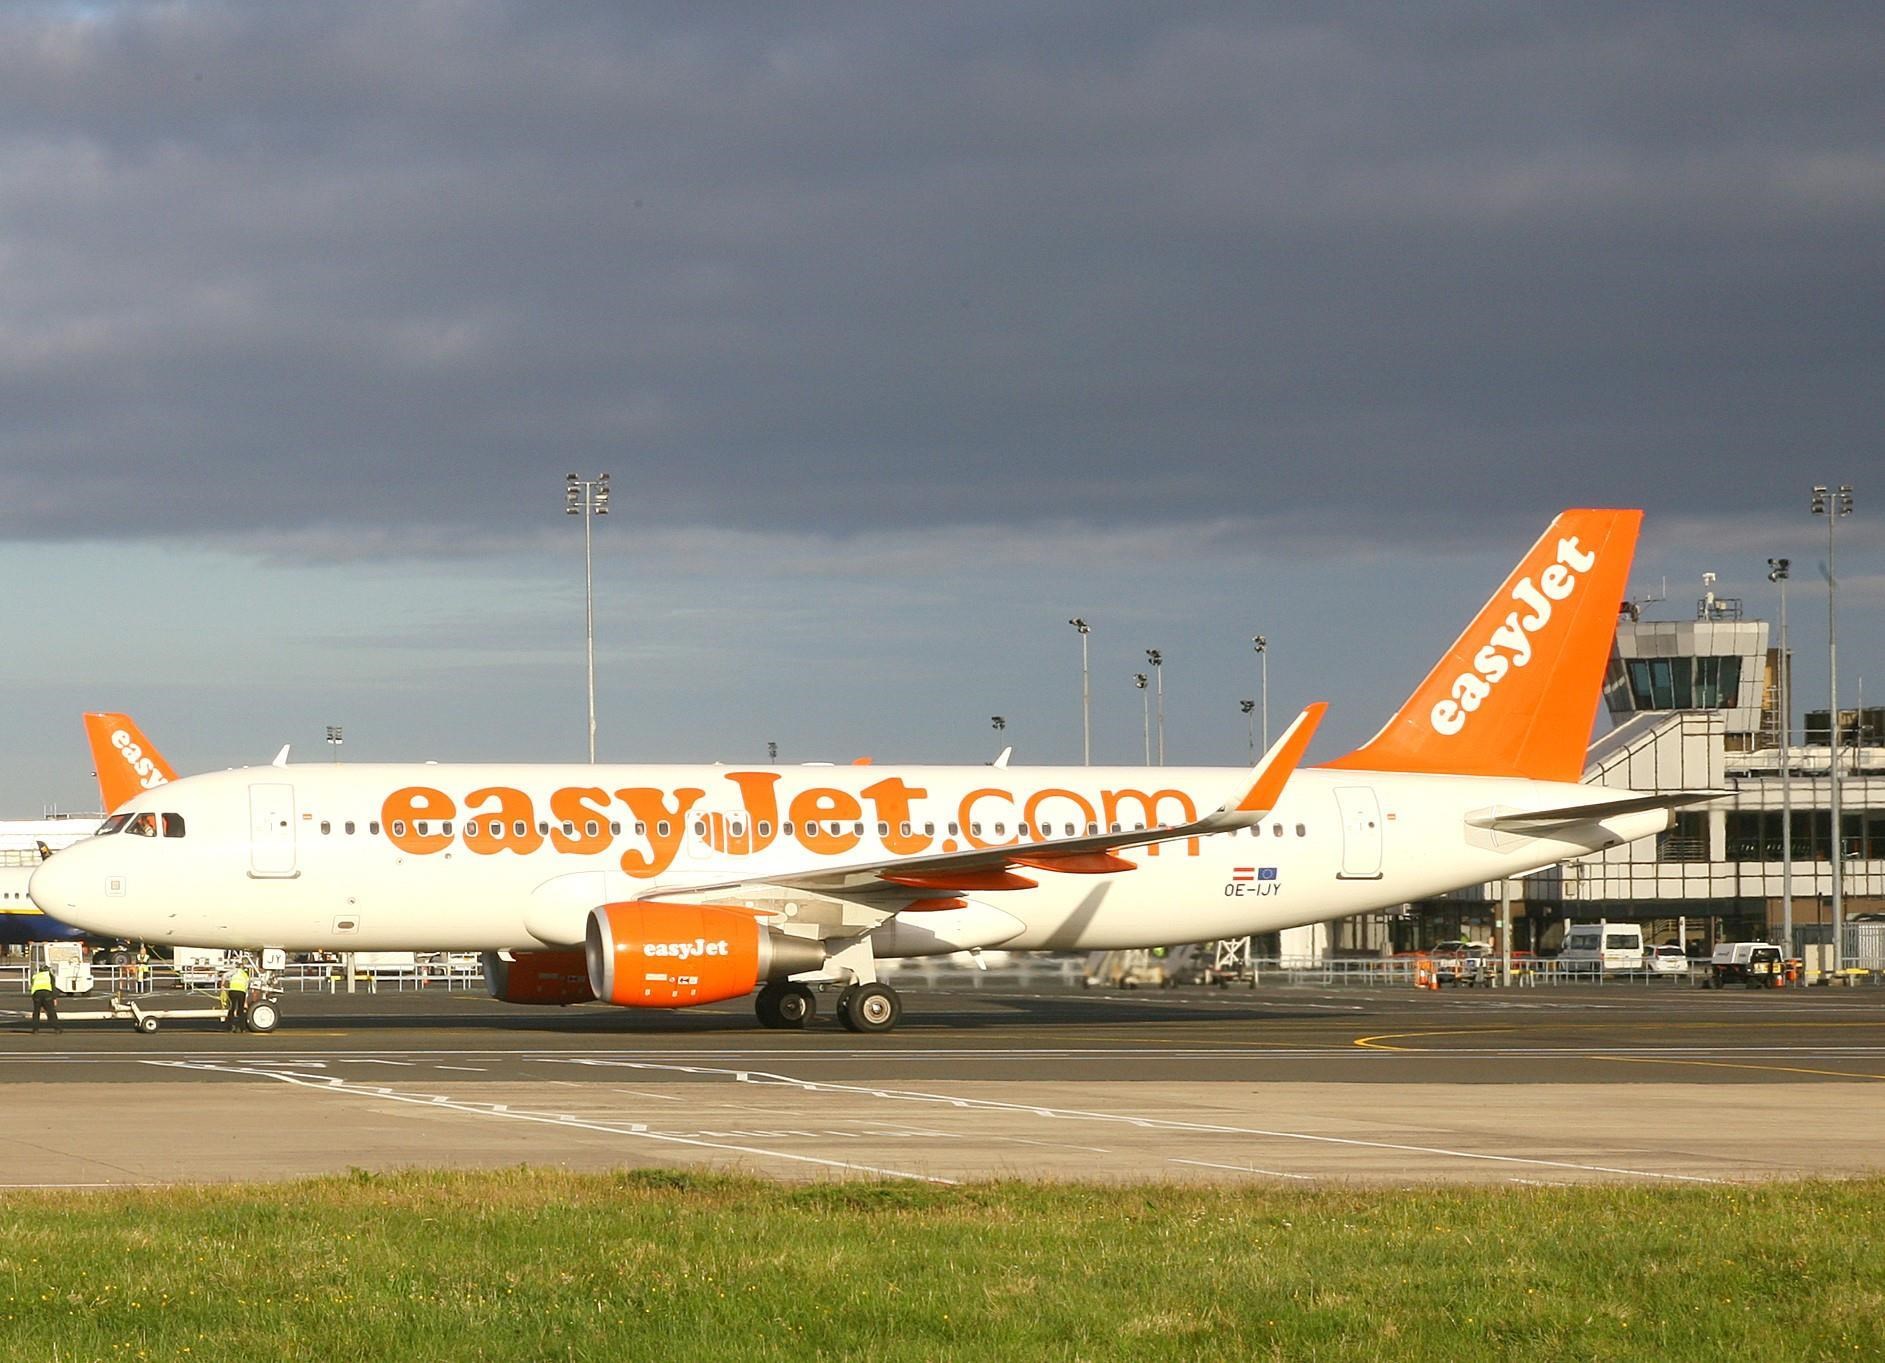 More easyJet flights resuming from BFS & summer 2021 on sale now